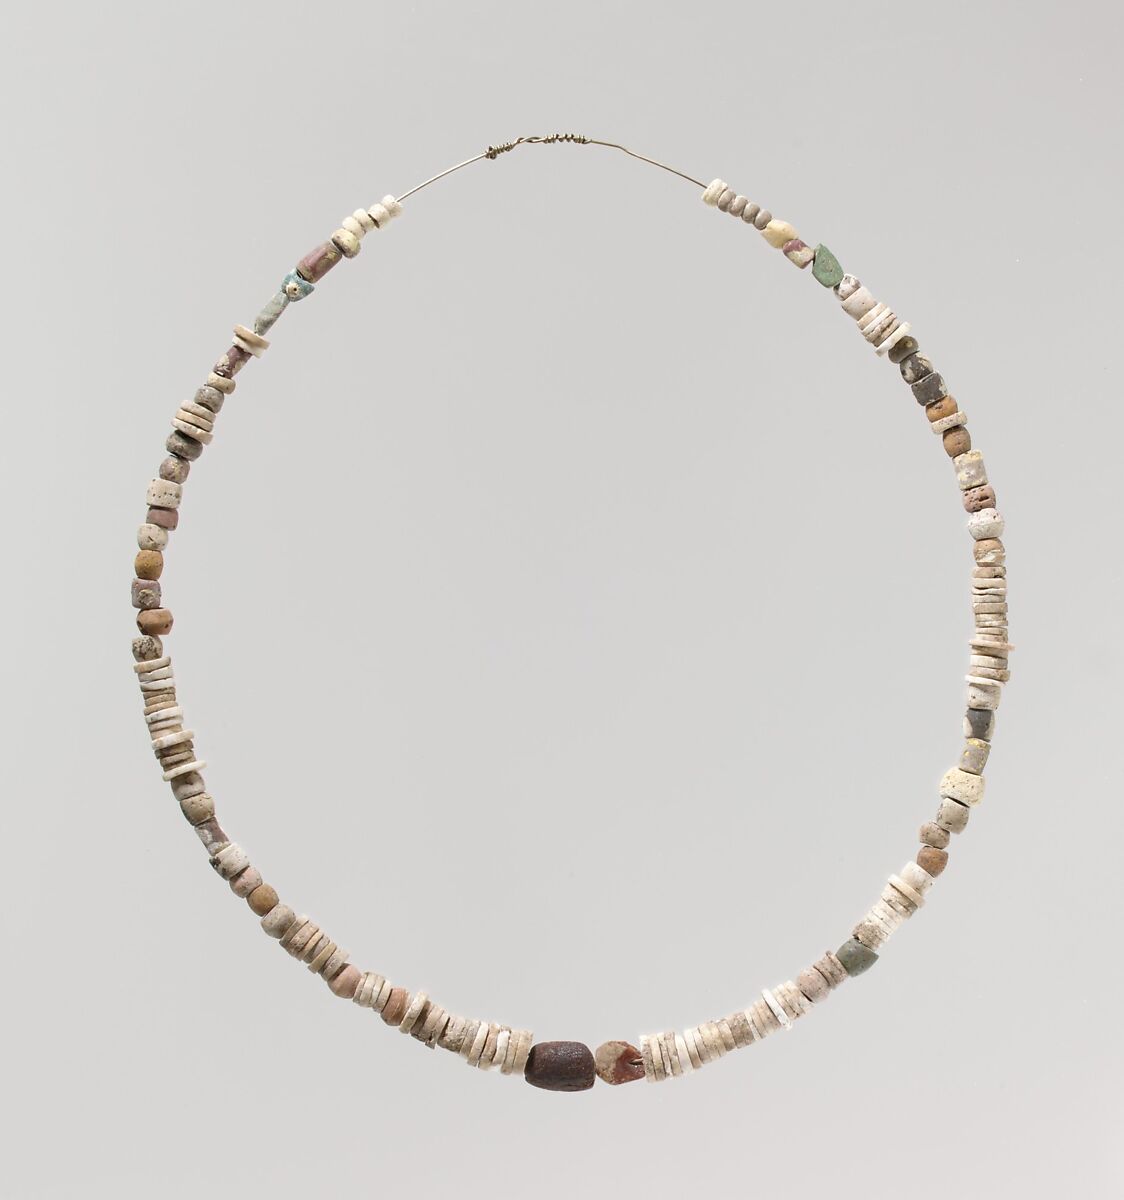 Beads from a Necklace, Glass, amber, shell, Frankish 